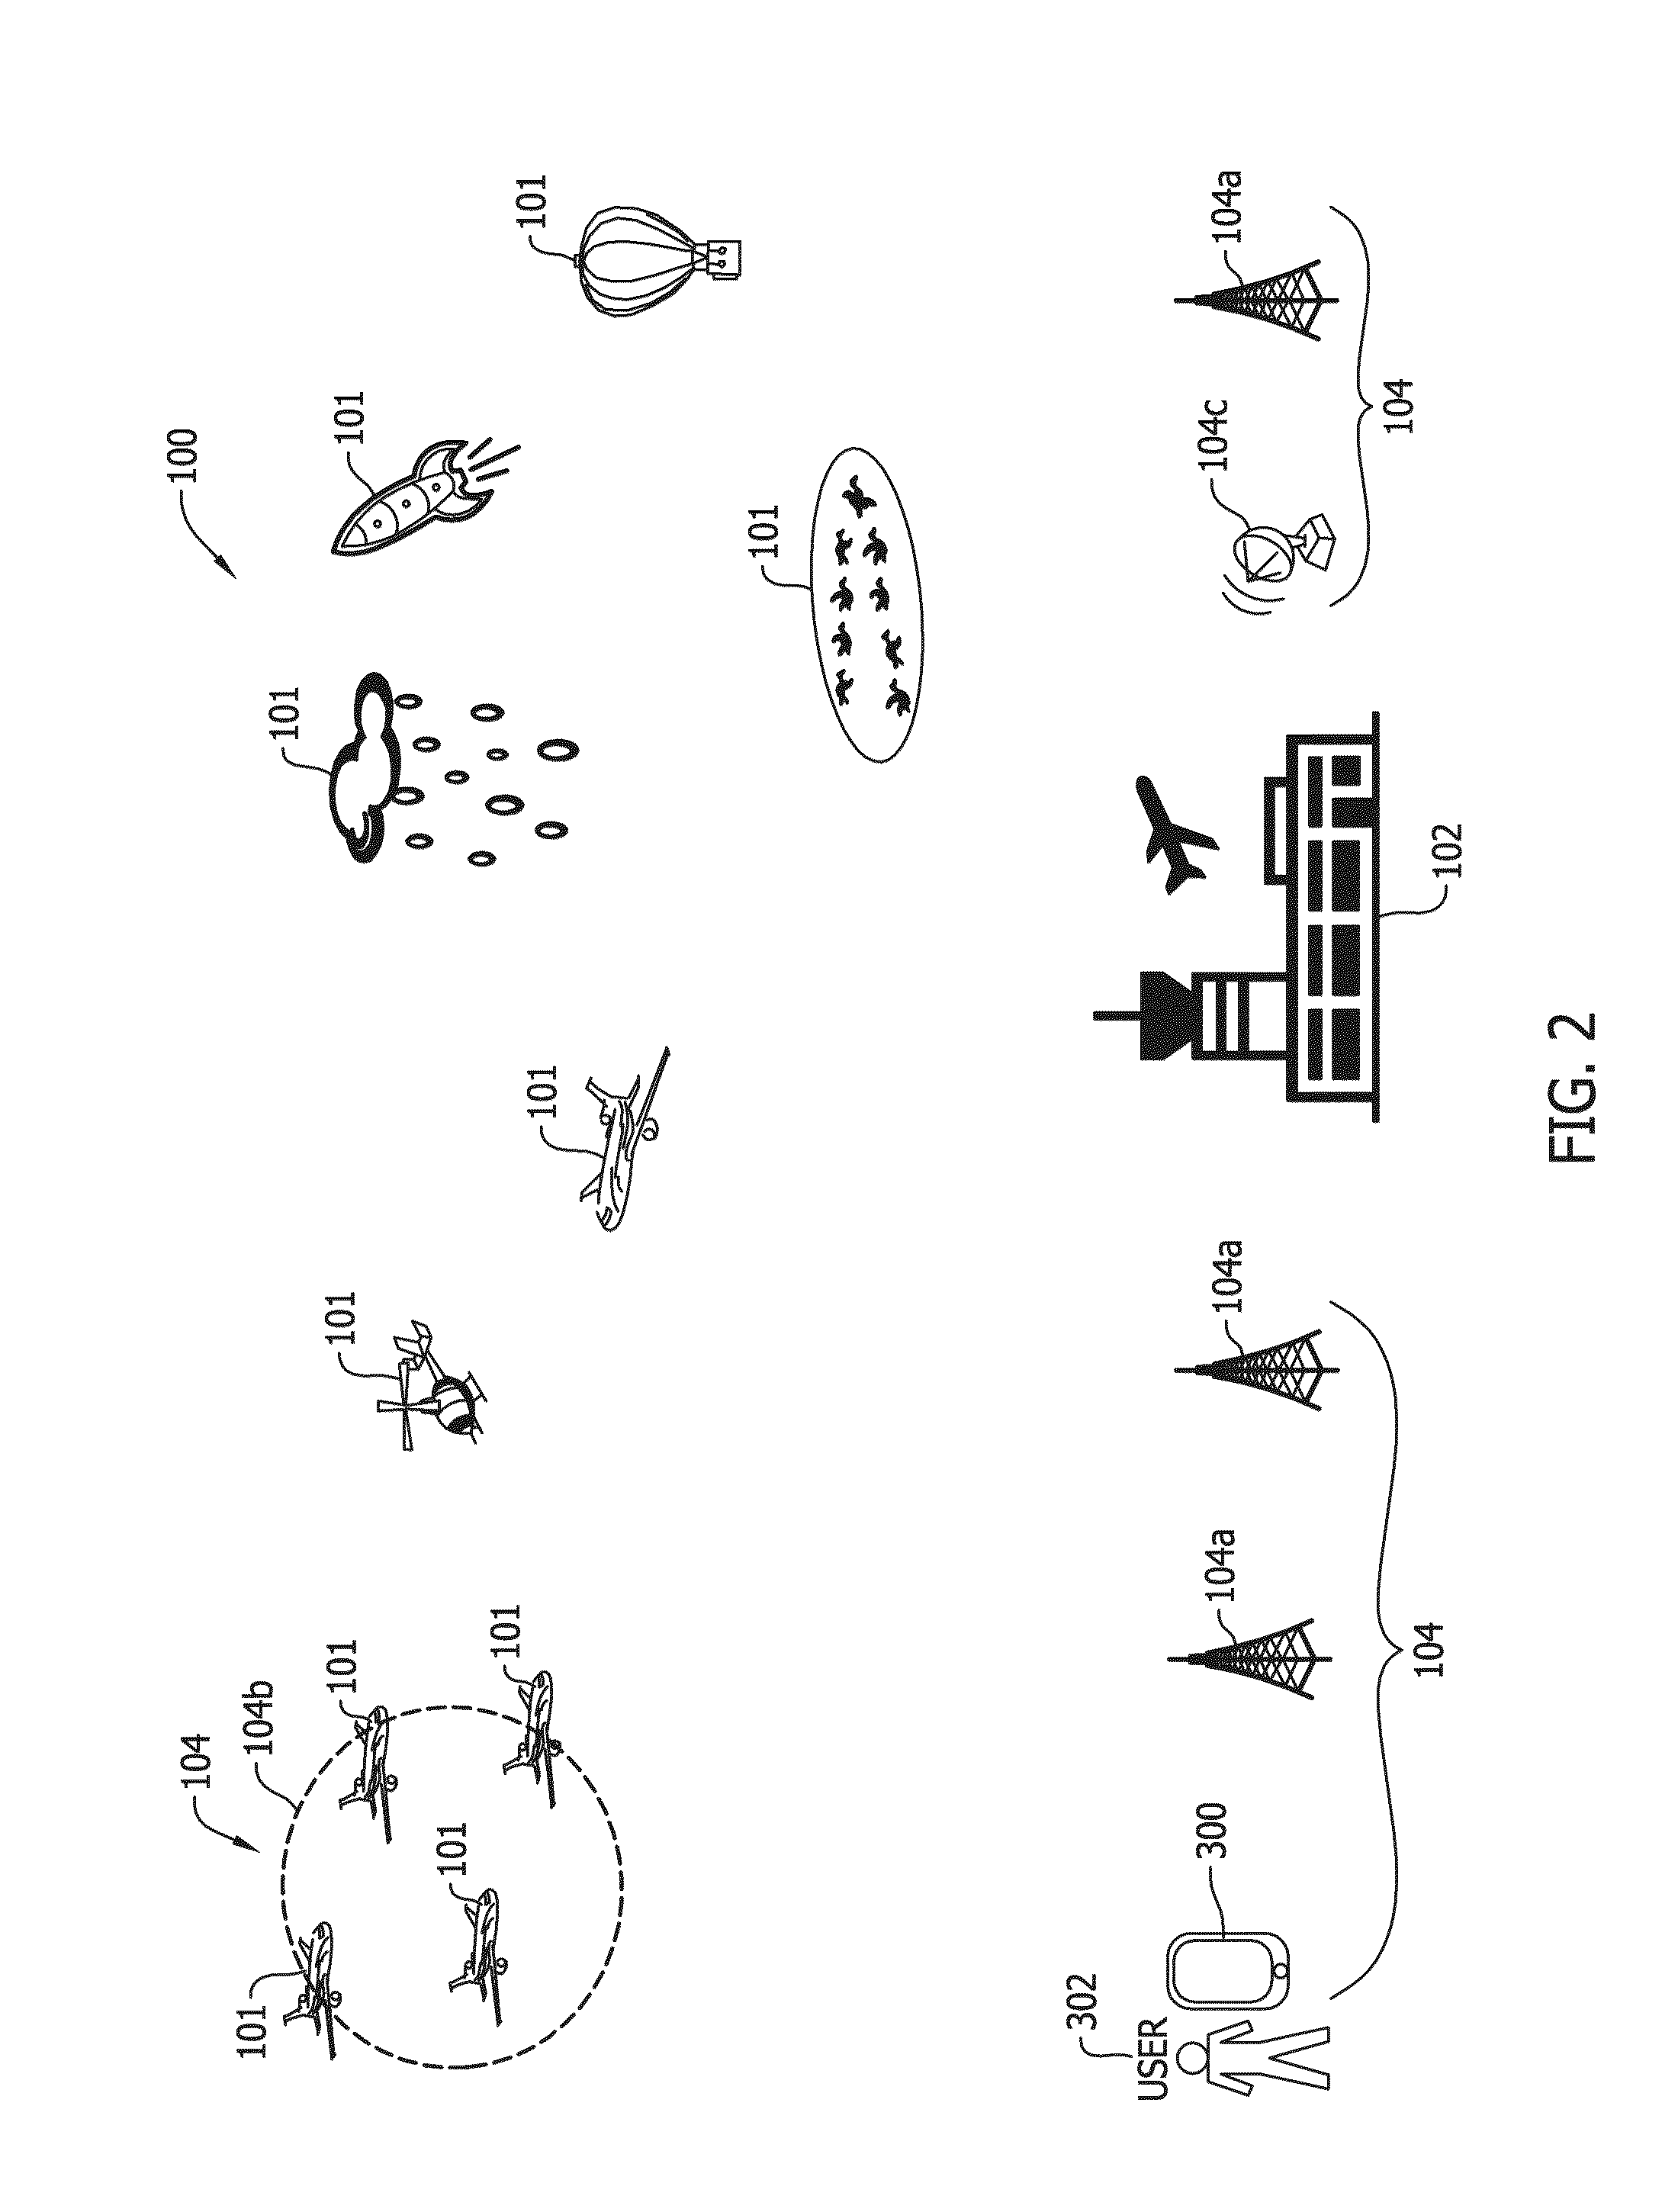 Systems and methods for monitoring airborne objects